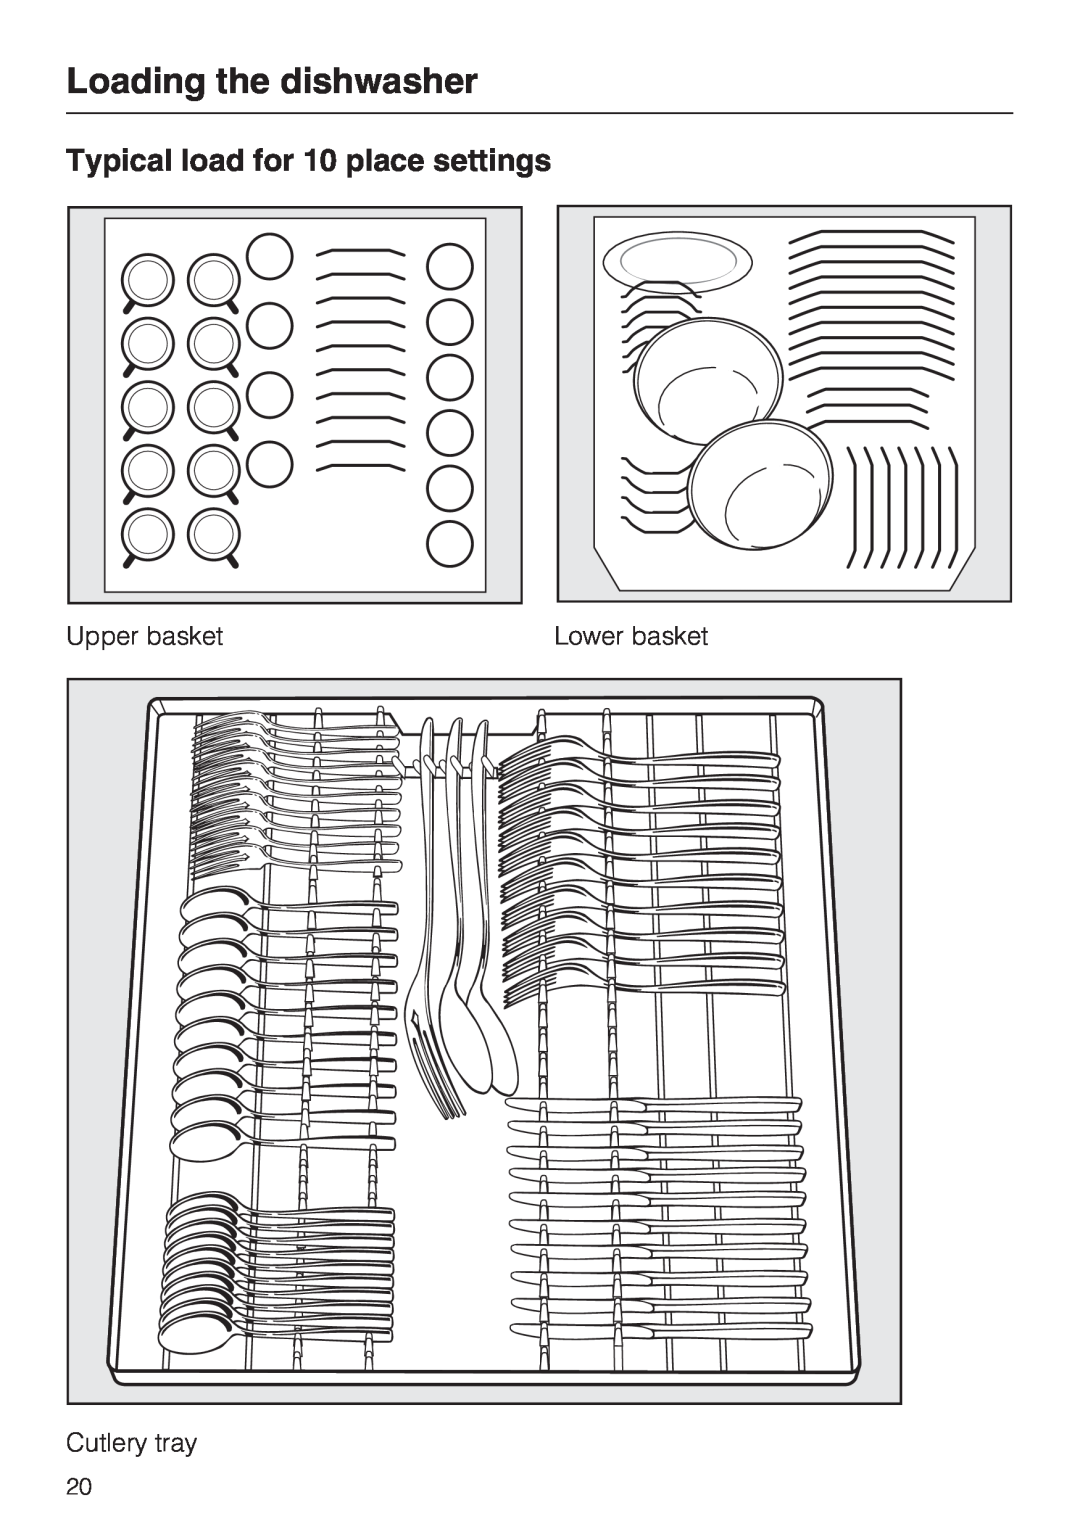 Miele G 5775, G 5770 Typical load for 10 place settings, Loading the dishwasher, Upper basket, Lower basket, Cutlery tray 